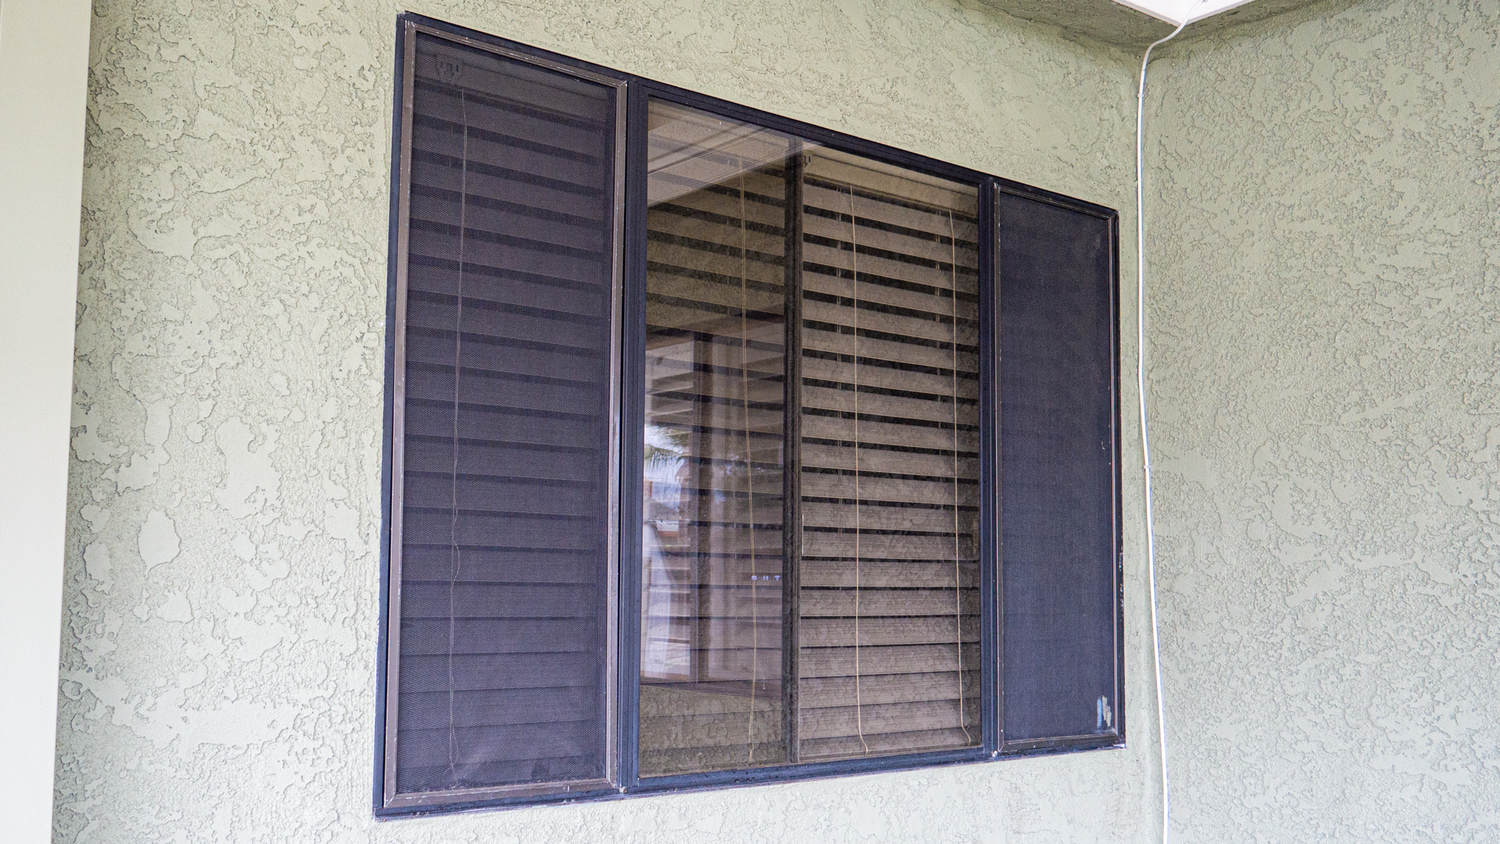 Window install -Sound package from Anlin